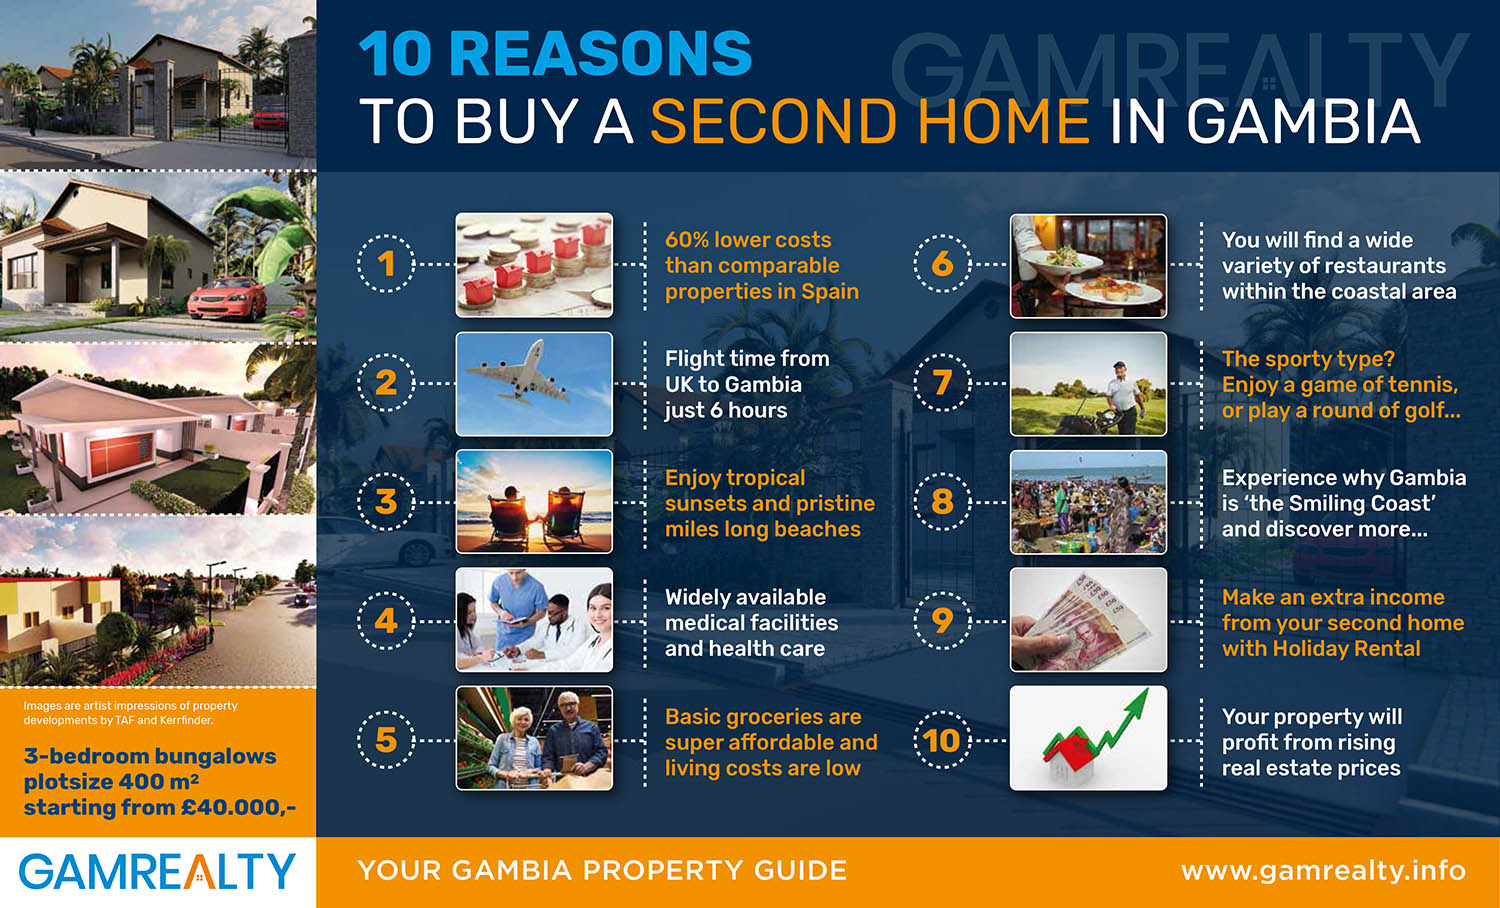 10 Reasons for buying second home in Gambia